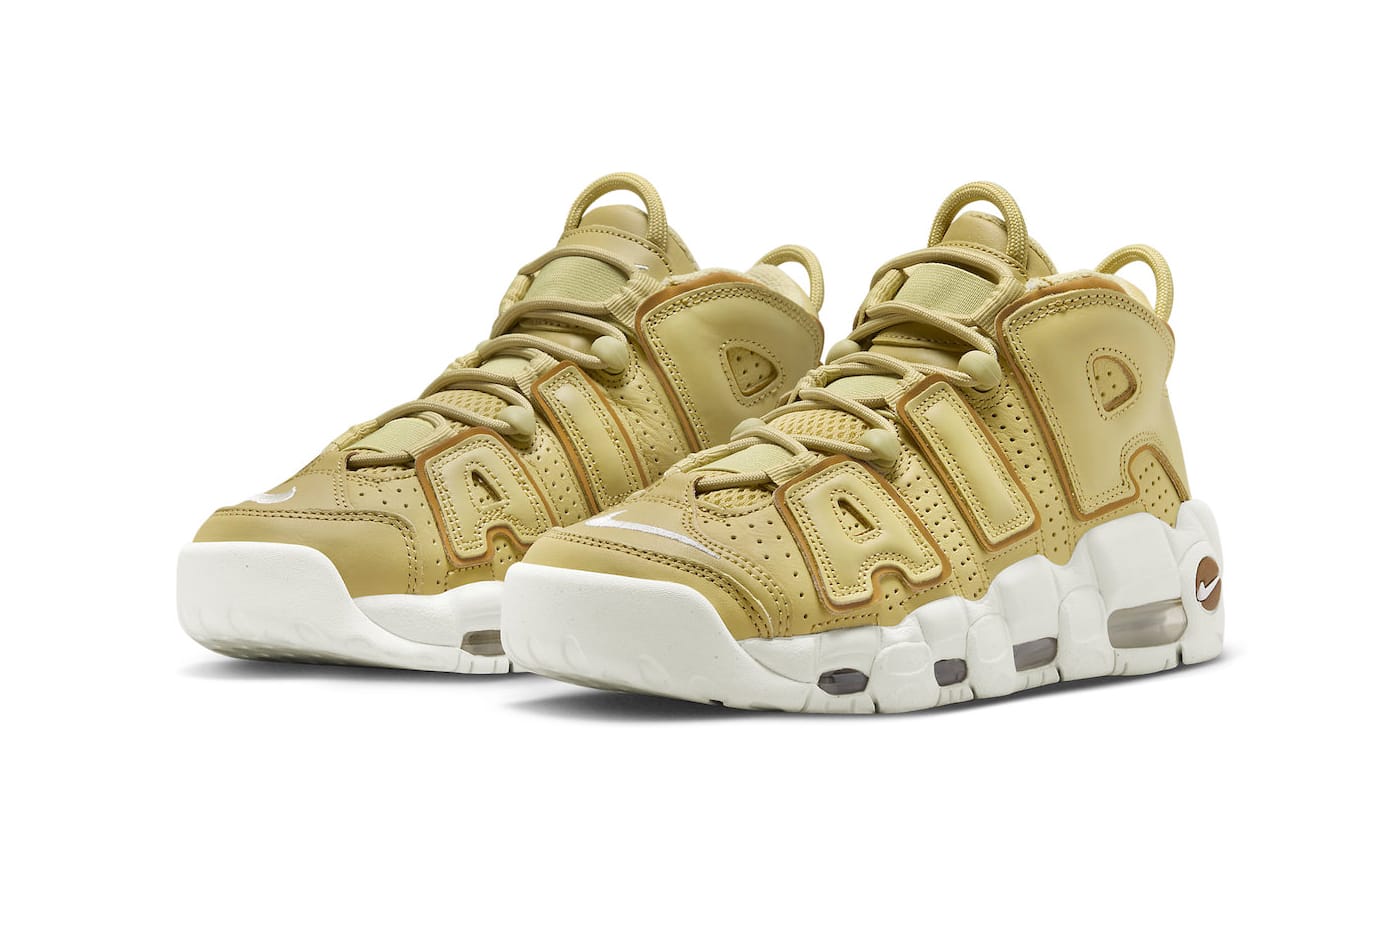 Nike Air More Uptempo Surfaces in 